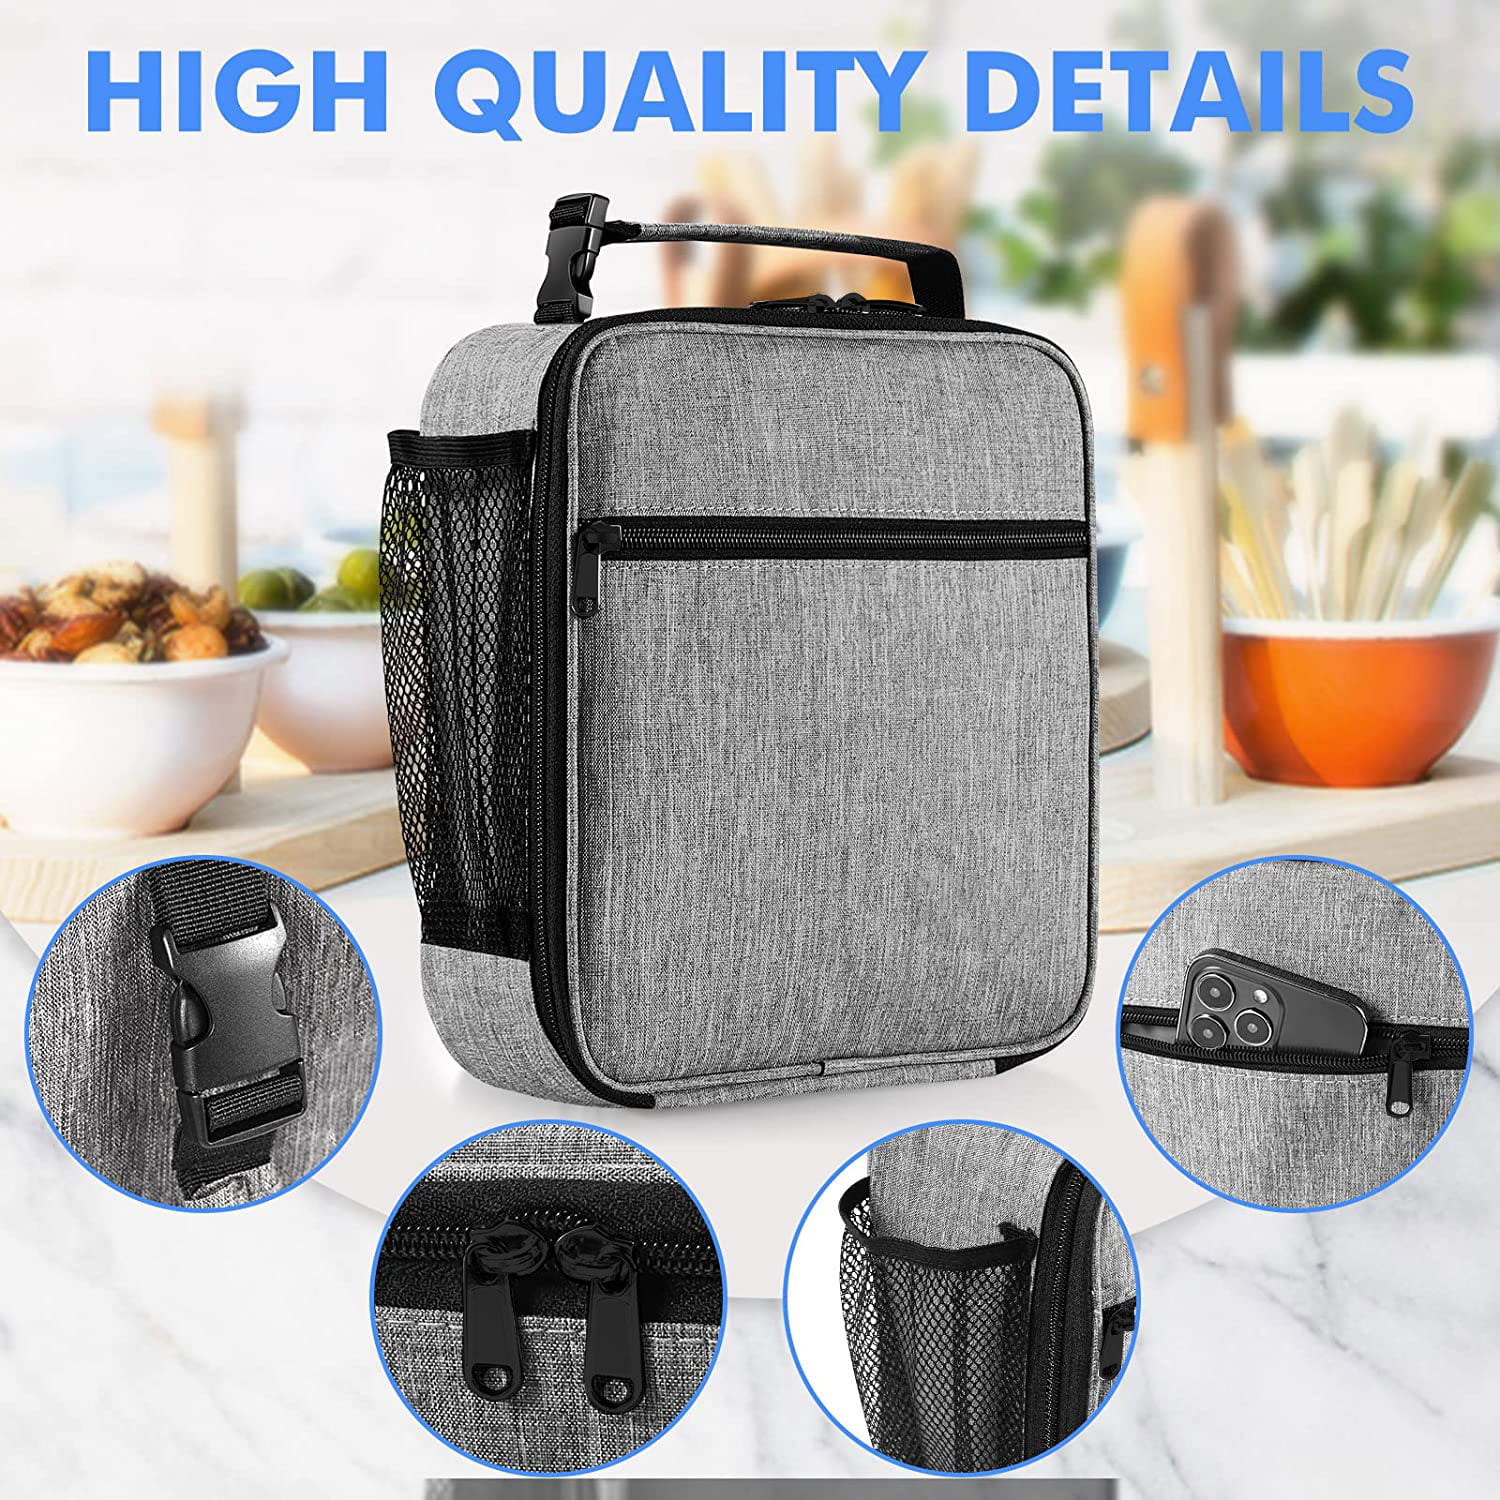 Reusable Insulated Thermal Lunch Bag Cute Lunch Box For Teens Boys Girls  Adult Women Work School Outdoor Travel Picnic Beach BBQ Party